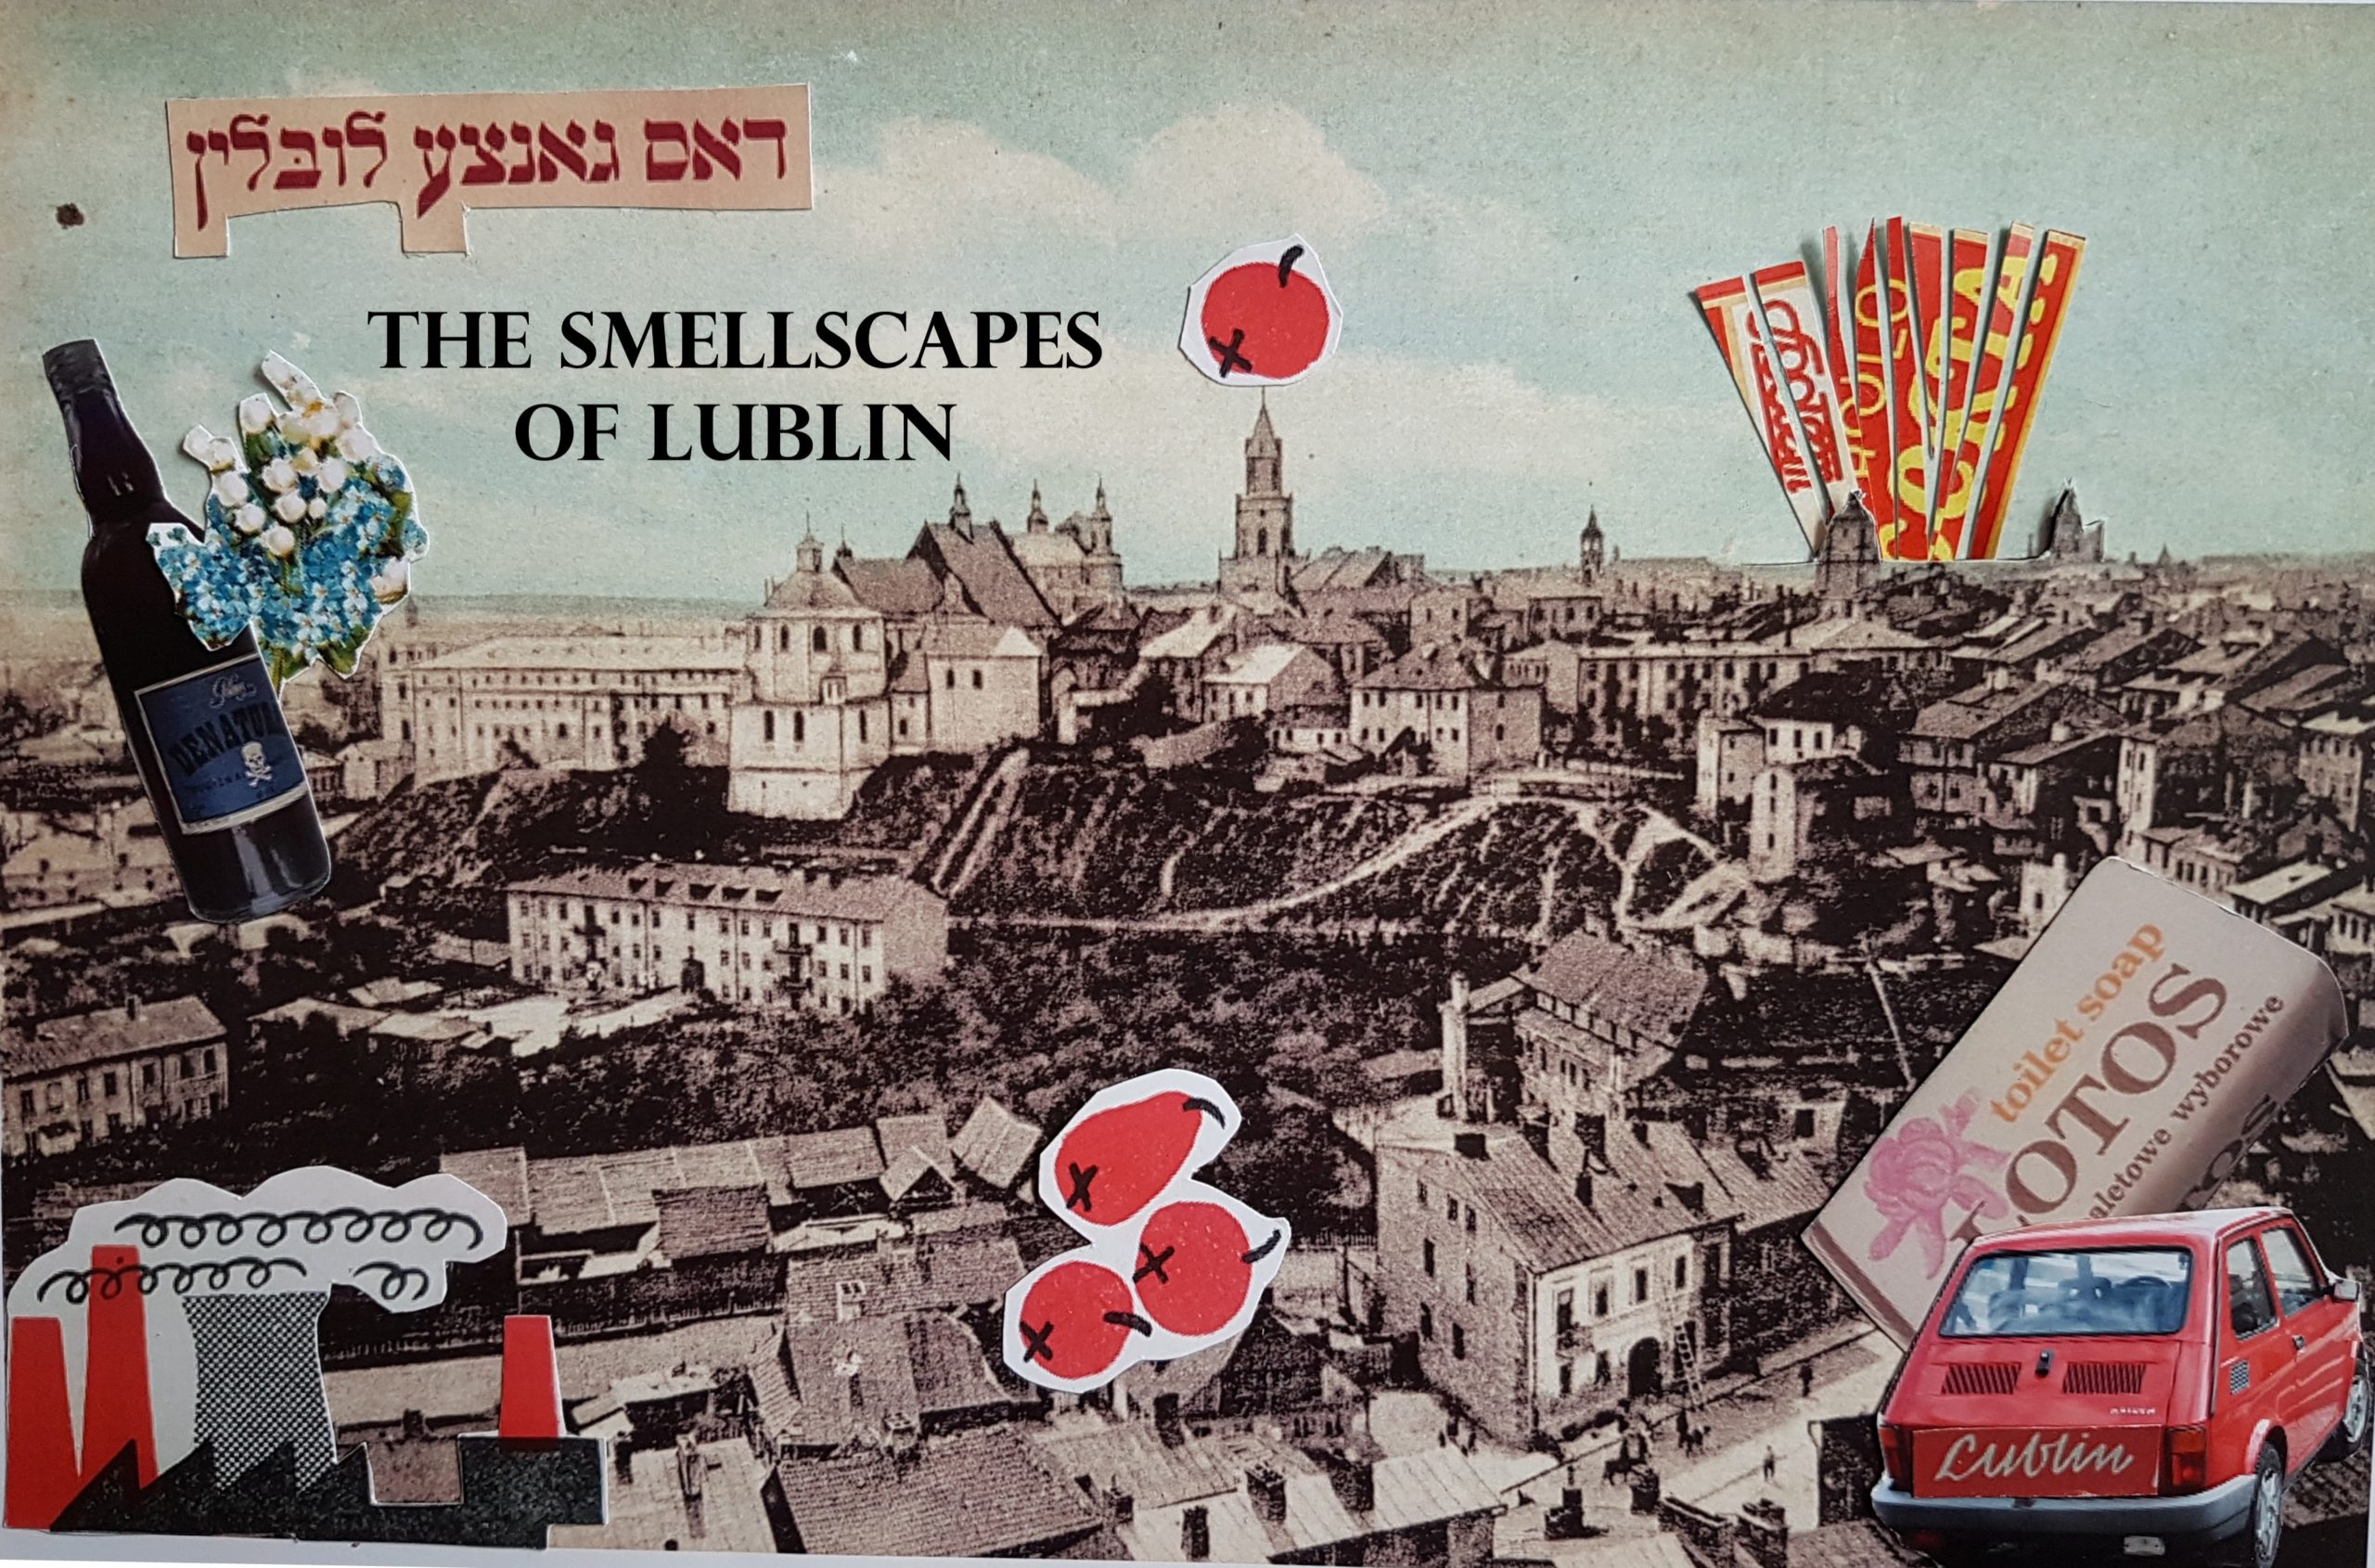 The smellscapes of Lublin